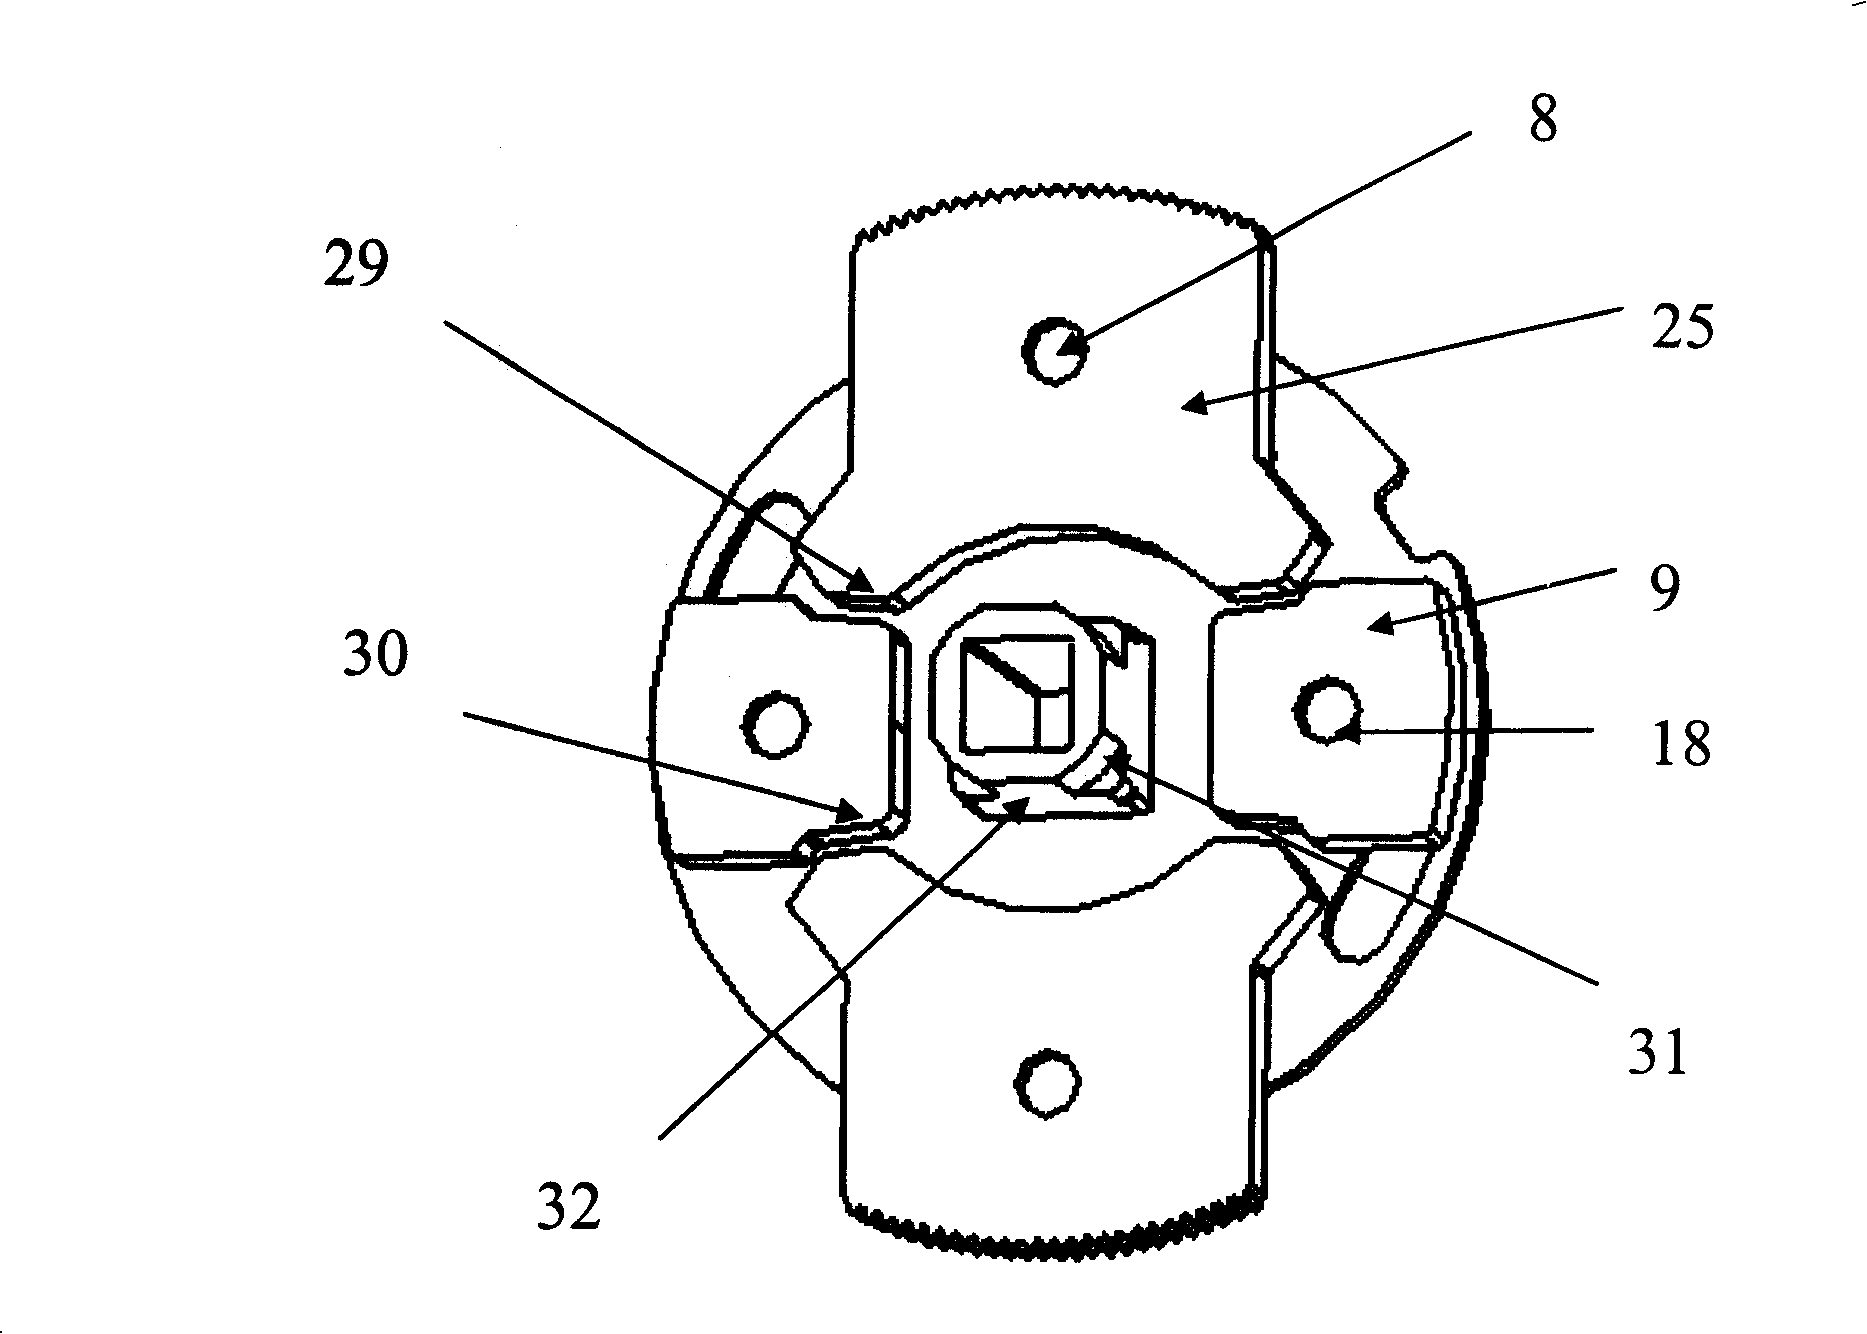 Device for regulating chair angle